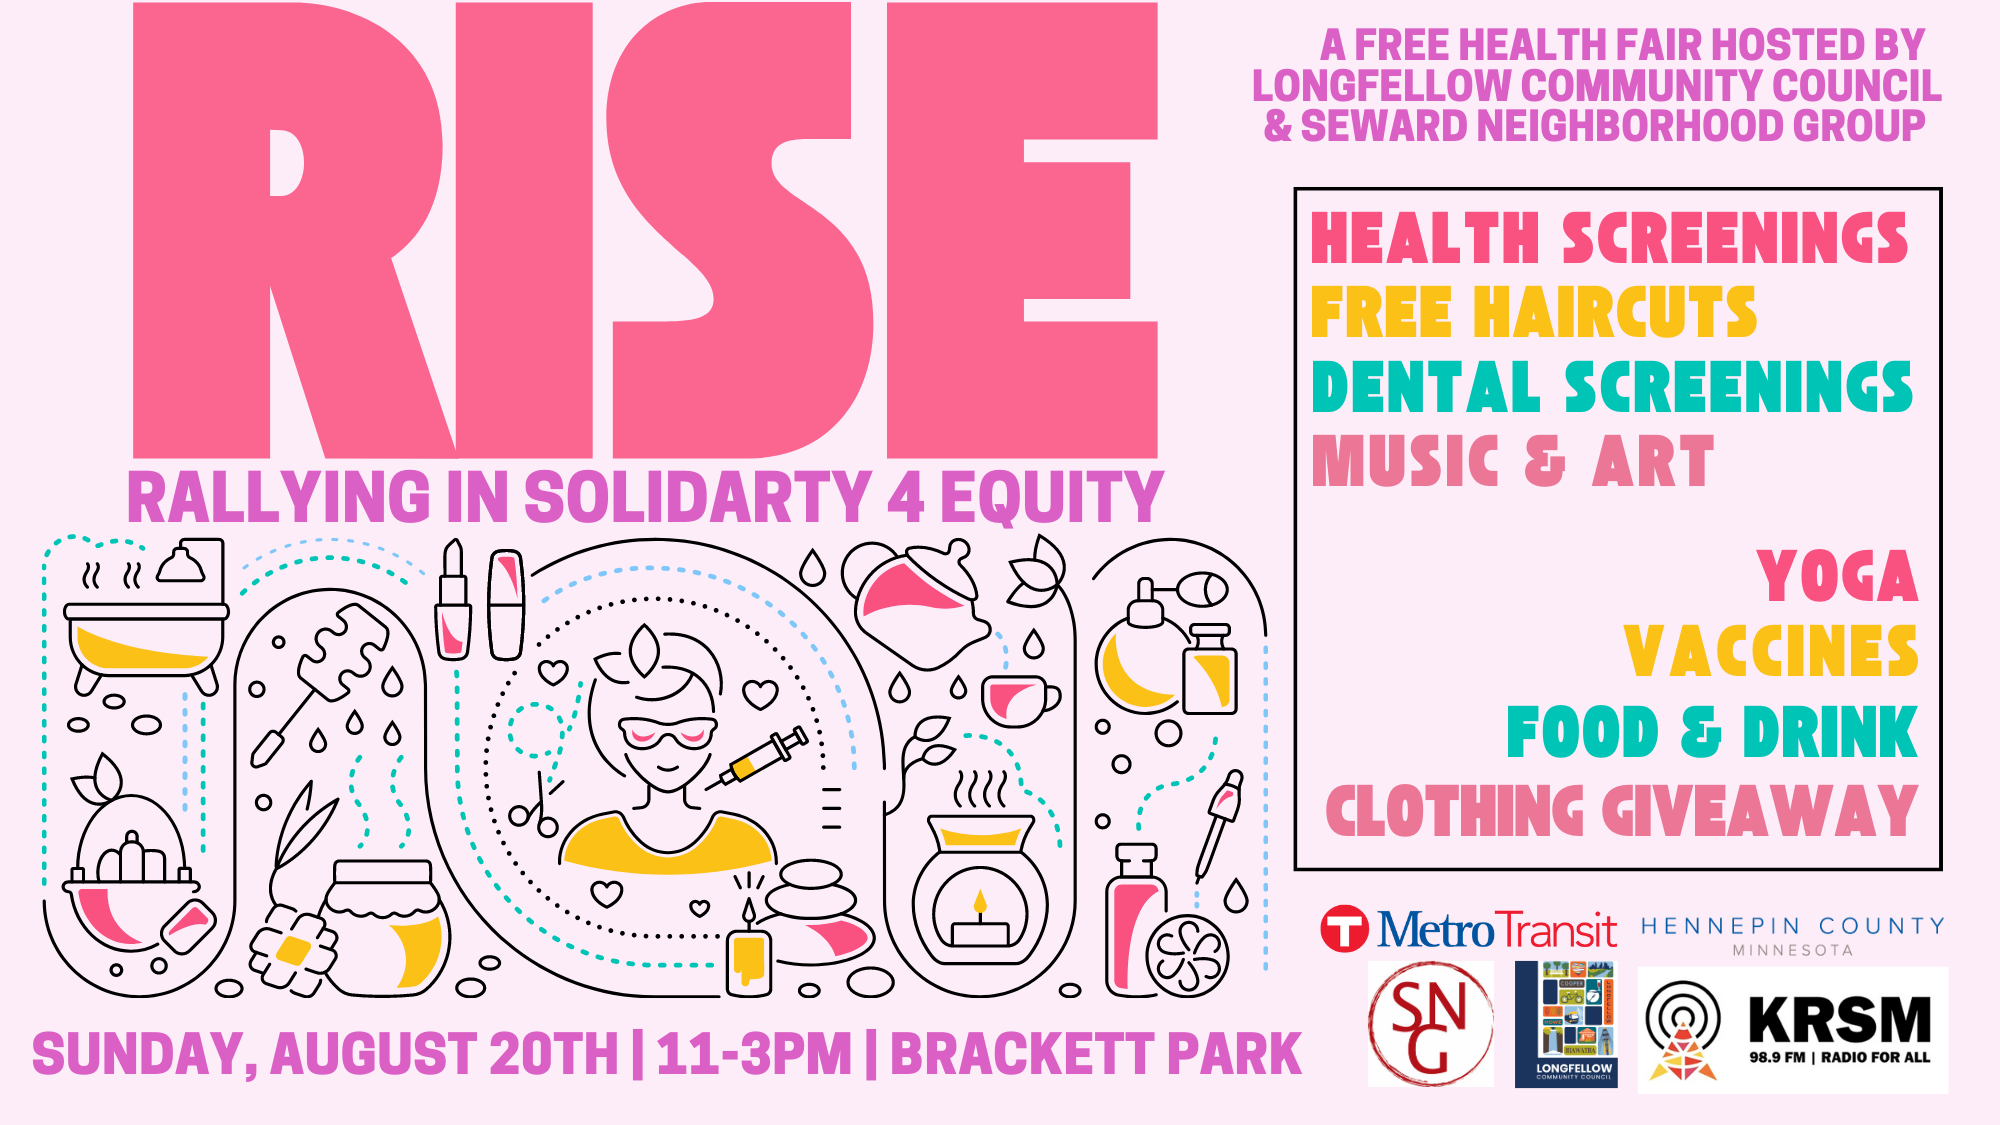 RISE Health Equity event featuring dental cleanings, free haircuts, health screenings, music, yoga, free clothing giveaway and more